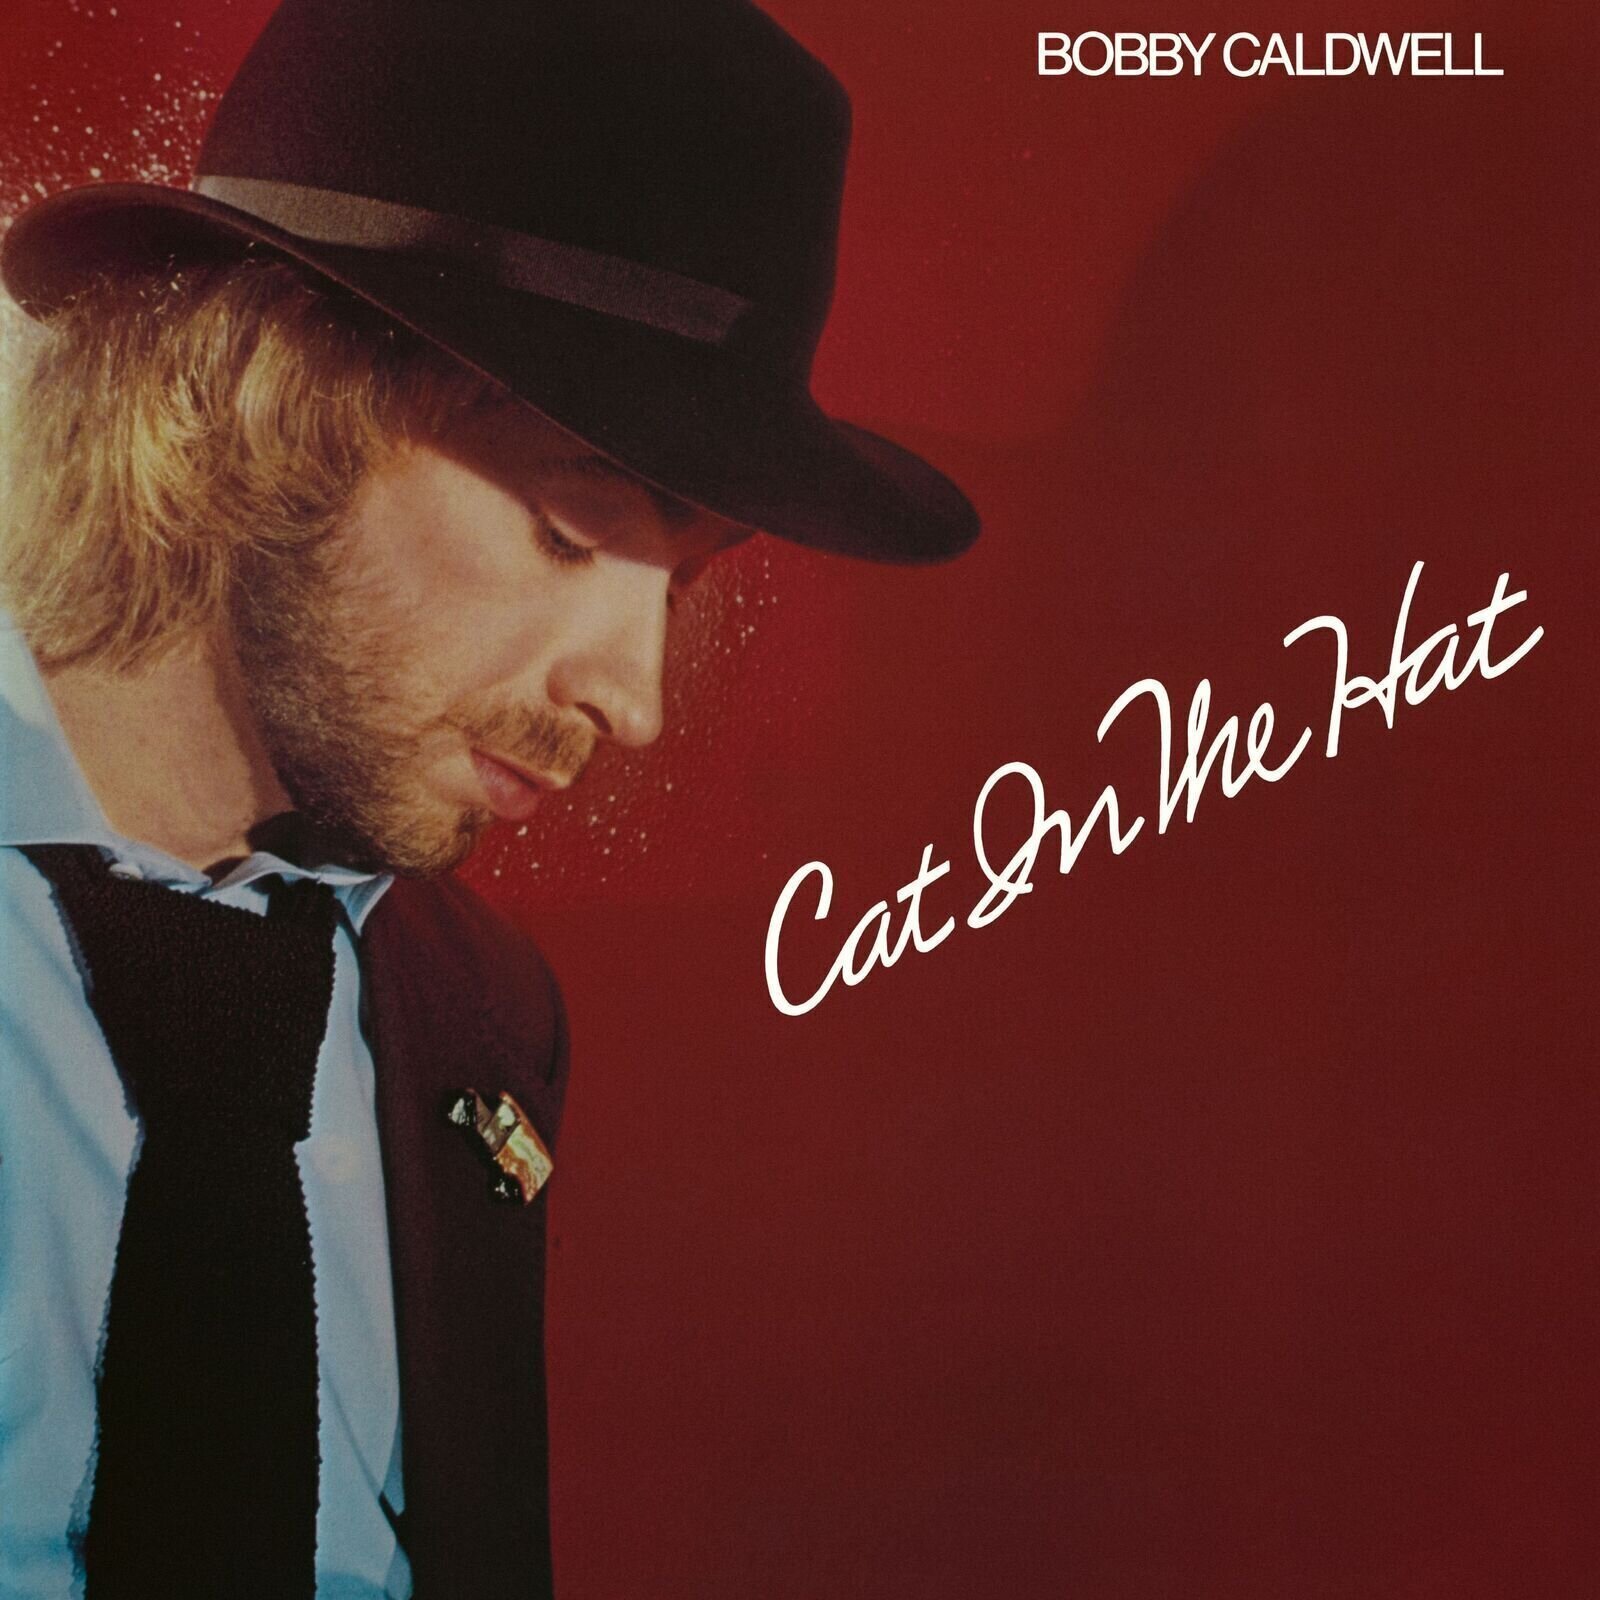 Bobby Caldwell - Cat In the Hat (LP) Bobby Caldwell